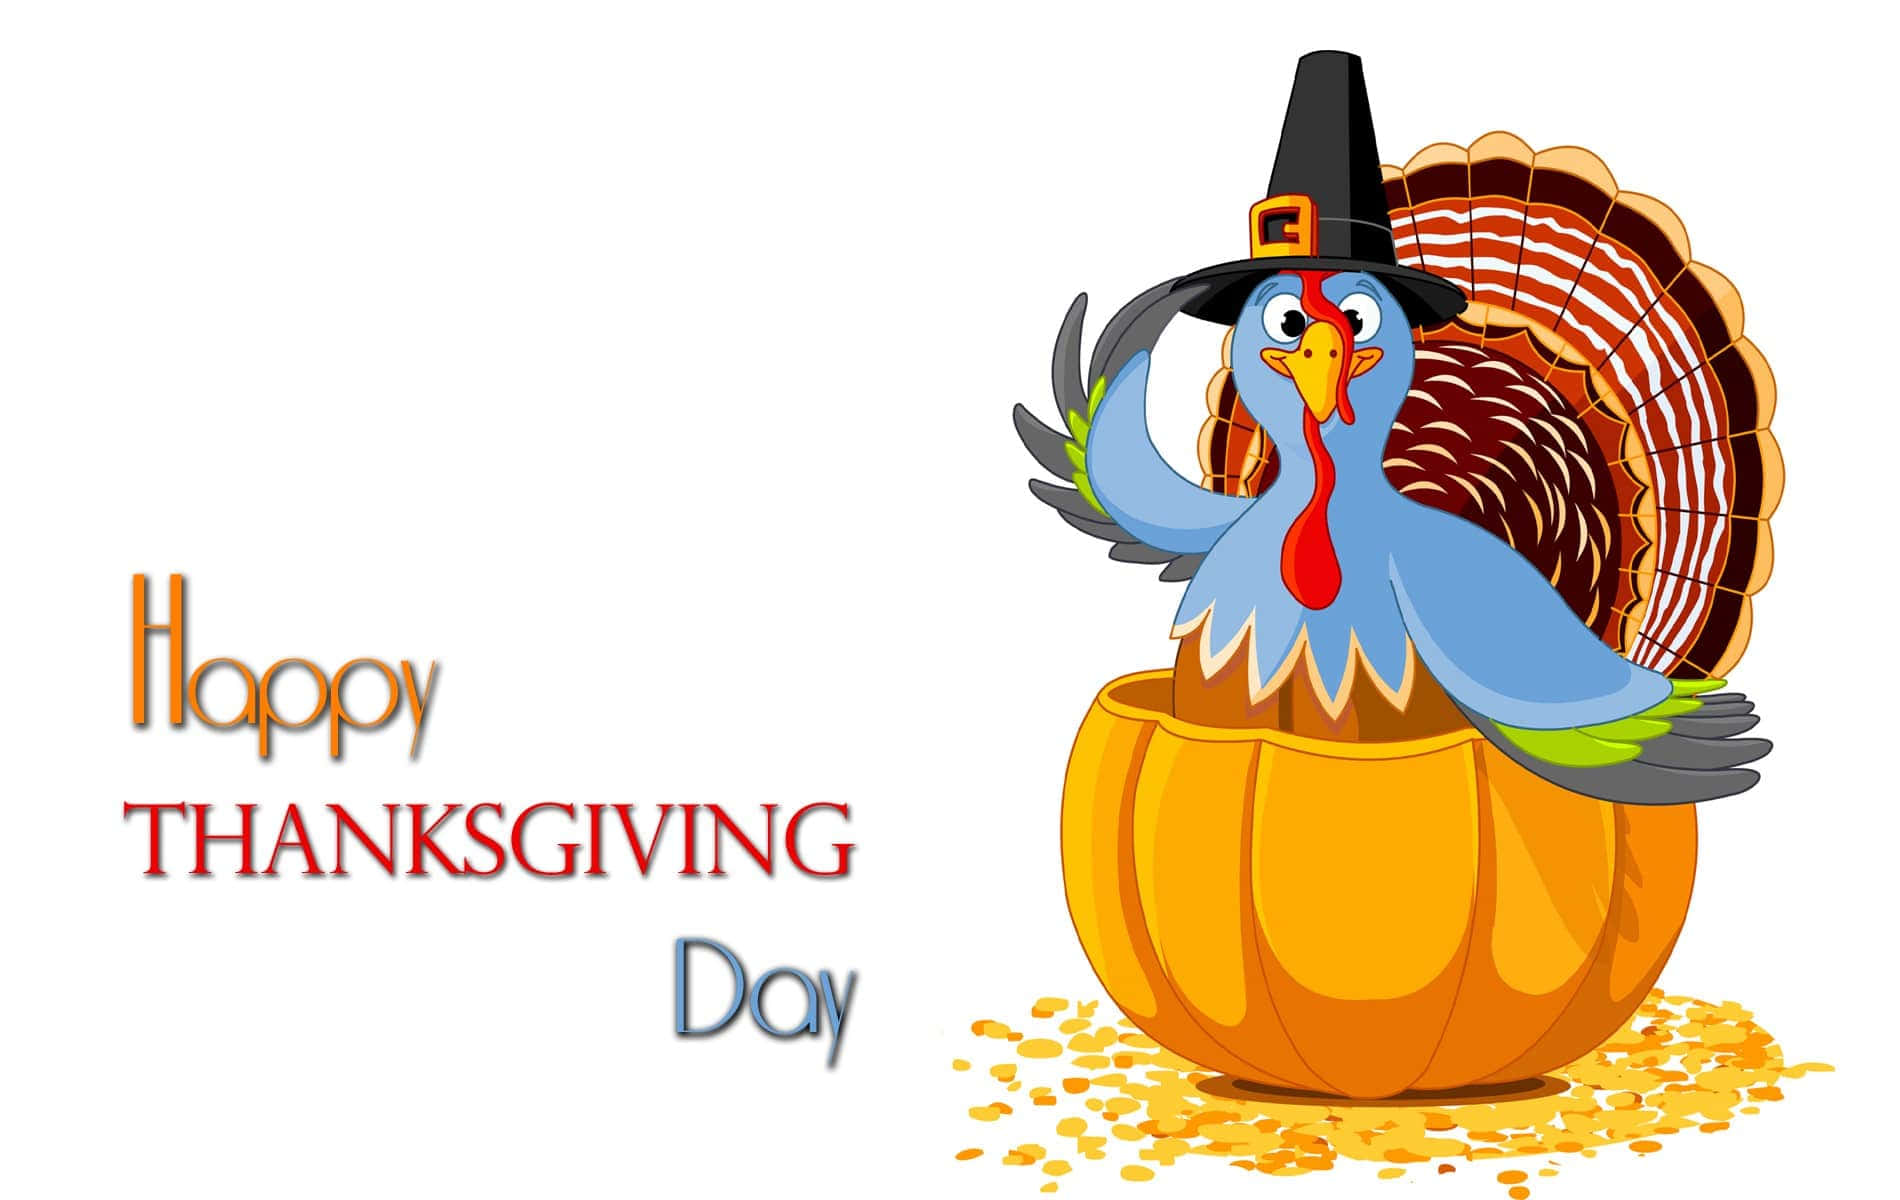 Wishing you a happy Thanksgiving!